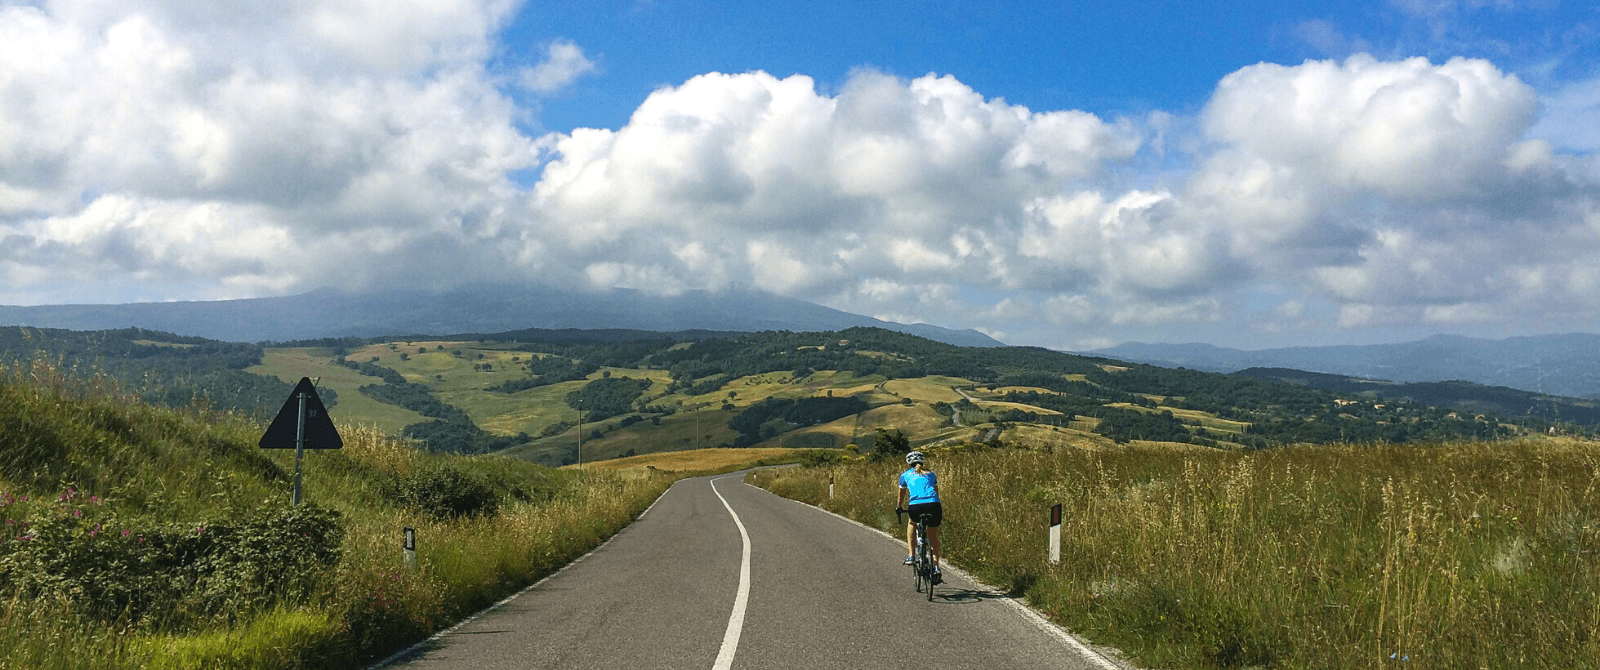 Cyclist heads downhill on road winding towards patchwork hills